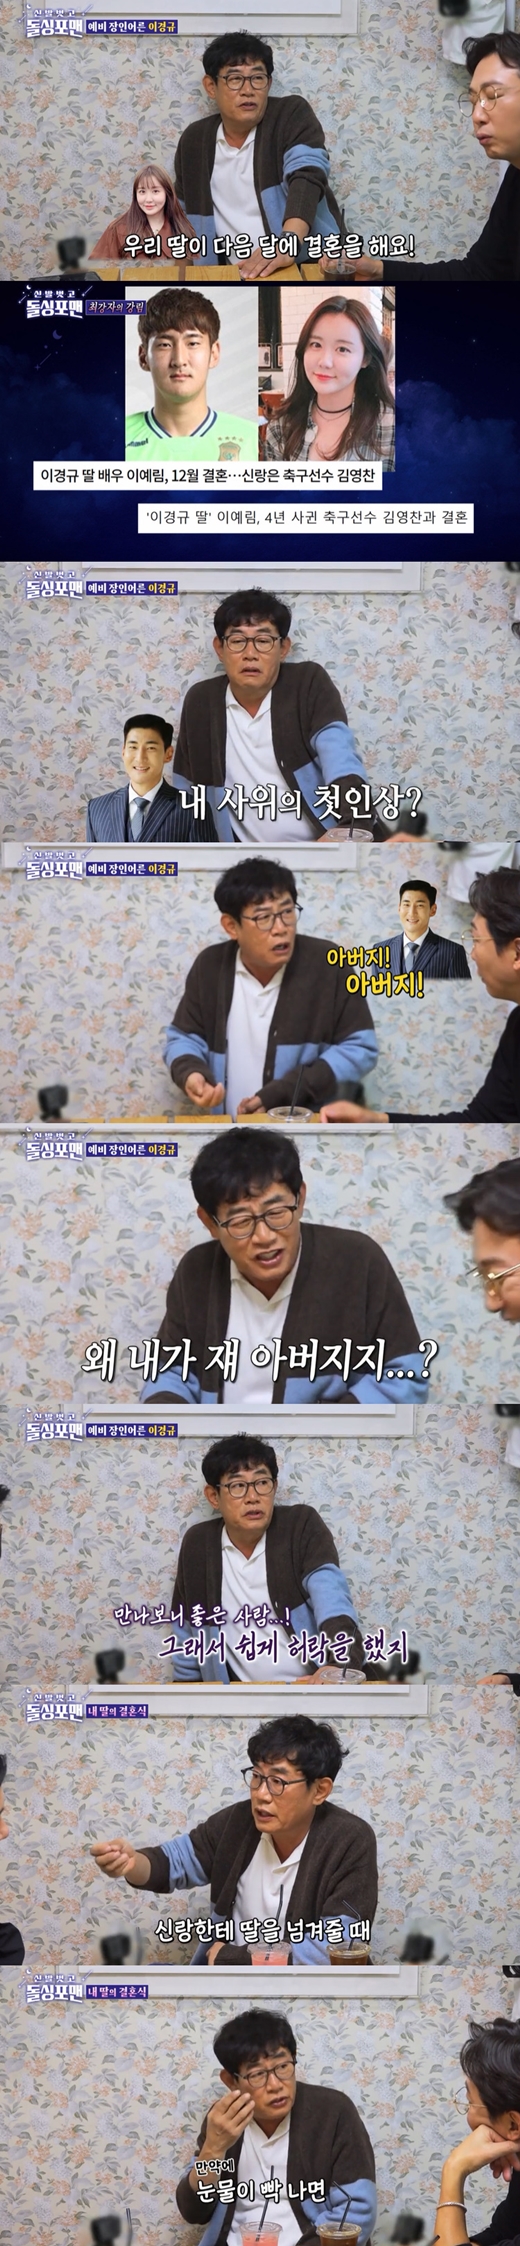 Comedian Lee Kyung-kyu reveals her heart ahead of her daughters marriageLee Kyung-kyu appeared as a guest on SBS shoes naked stone foreman broadcast on the 30th night and met with Tak Jae-hoon, Lee Sang-min, Kim Jun-ho and Lim Won-hee.Actor Lee Ye Rim, daughter of Lee Kyung-kyu, marries Kim Young-chan, a soccer player from Gyeongnam FC, in December.Lee Kyung-kyu revealed: My daughter marriages soon, I like football so much that I easily accepted marriage.My daughter is not interested in soccer, so I do not watch the World Cup, but I was watching the K-League.I keep seeing one team, and I know my boyfriend is a soccer player. Its hard to say that my son-in-law is a 100-year-old.I joked, he added, but I am a person my daughter is meeting, and I do not like it and I do not go. It is my daughters choice and I have to respect it.Lee Kyung-kyu said he relied heavily on his daughter, saying, I was worried about how I would live after I left.Yerim, who played a sponge-like role in the middle, disappears. Can I live well with my wife in 1:1? I was worried about marriage. When I asked people when they were saddest, they told me it was time to hand my daughter over to the groom.It is a time when I let go of my hand, he said. If I have tears, I will slip like I am crying.Meanwhile, Lee Kyung-kyu, who says there is no good man in the world, replied to the question of his prospective son-in-law, Good guy, I hope hes good guy, hes got to be good guy.